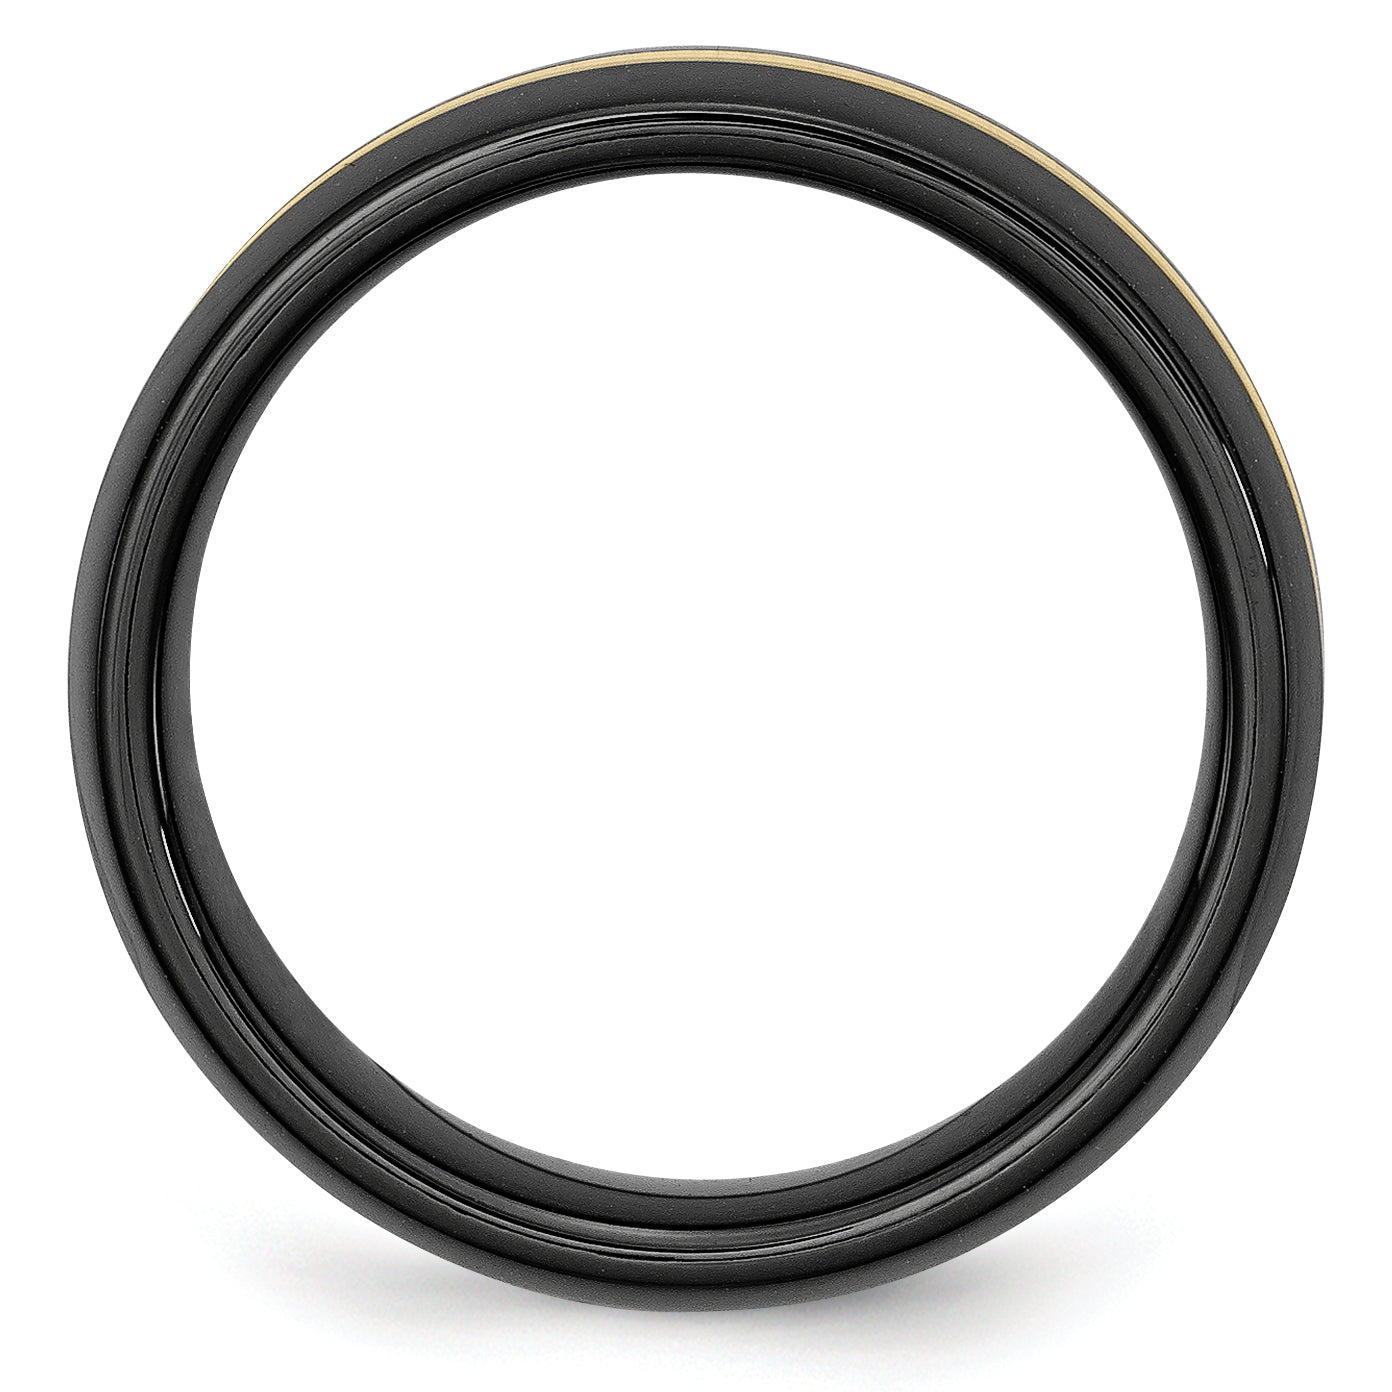 Ceramic Black with 14k Gold Inlay 8mm Polished Band